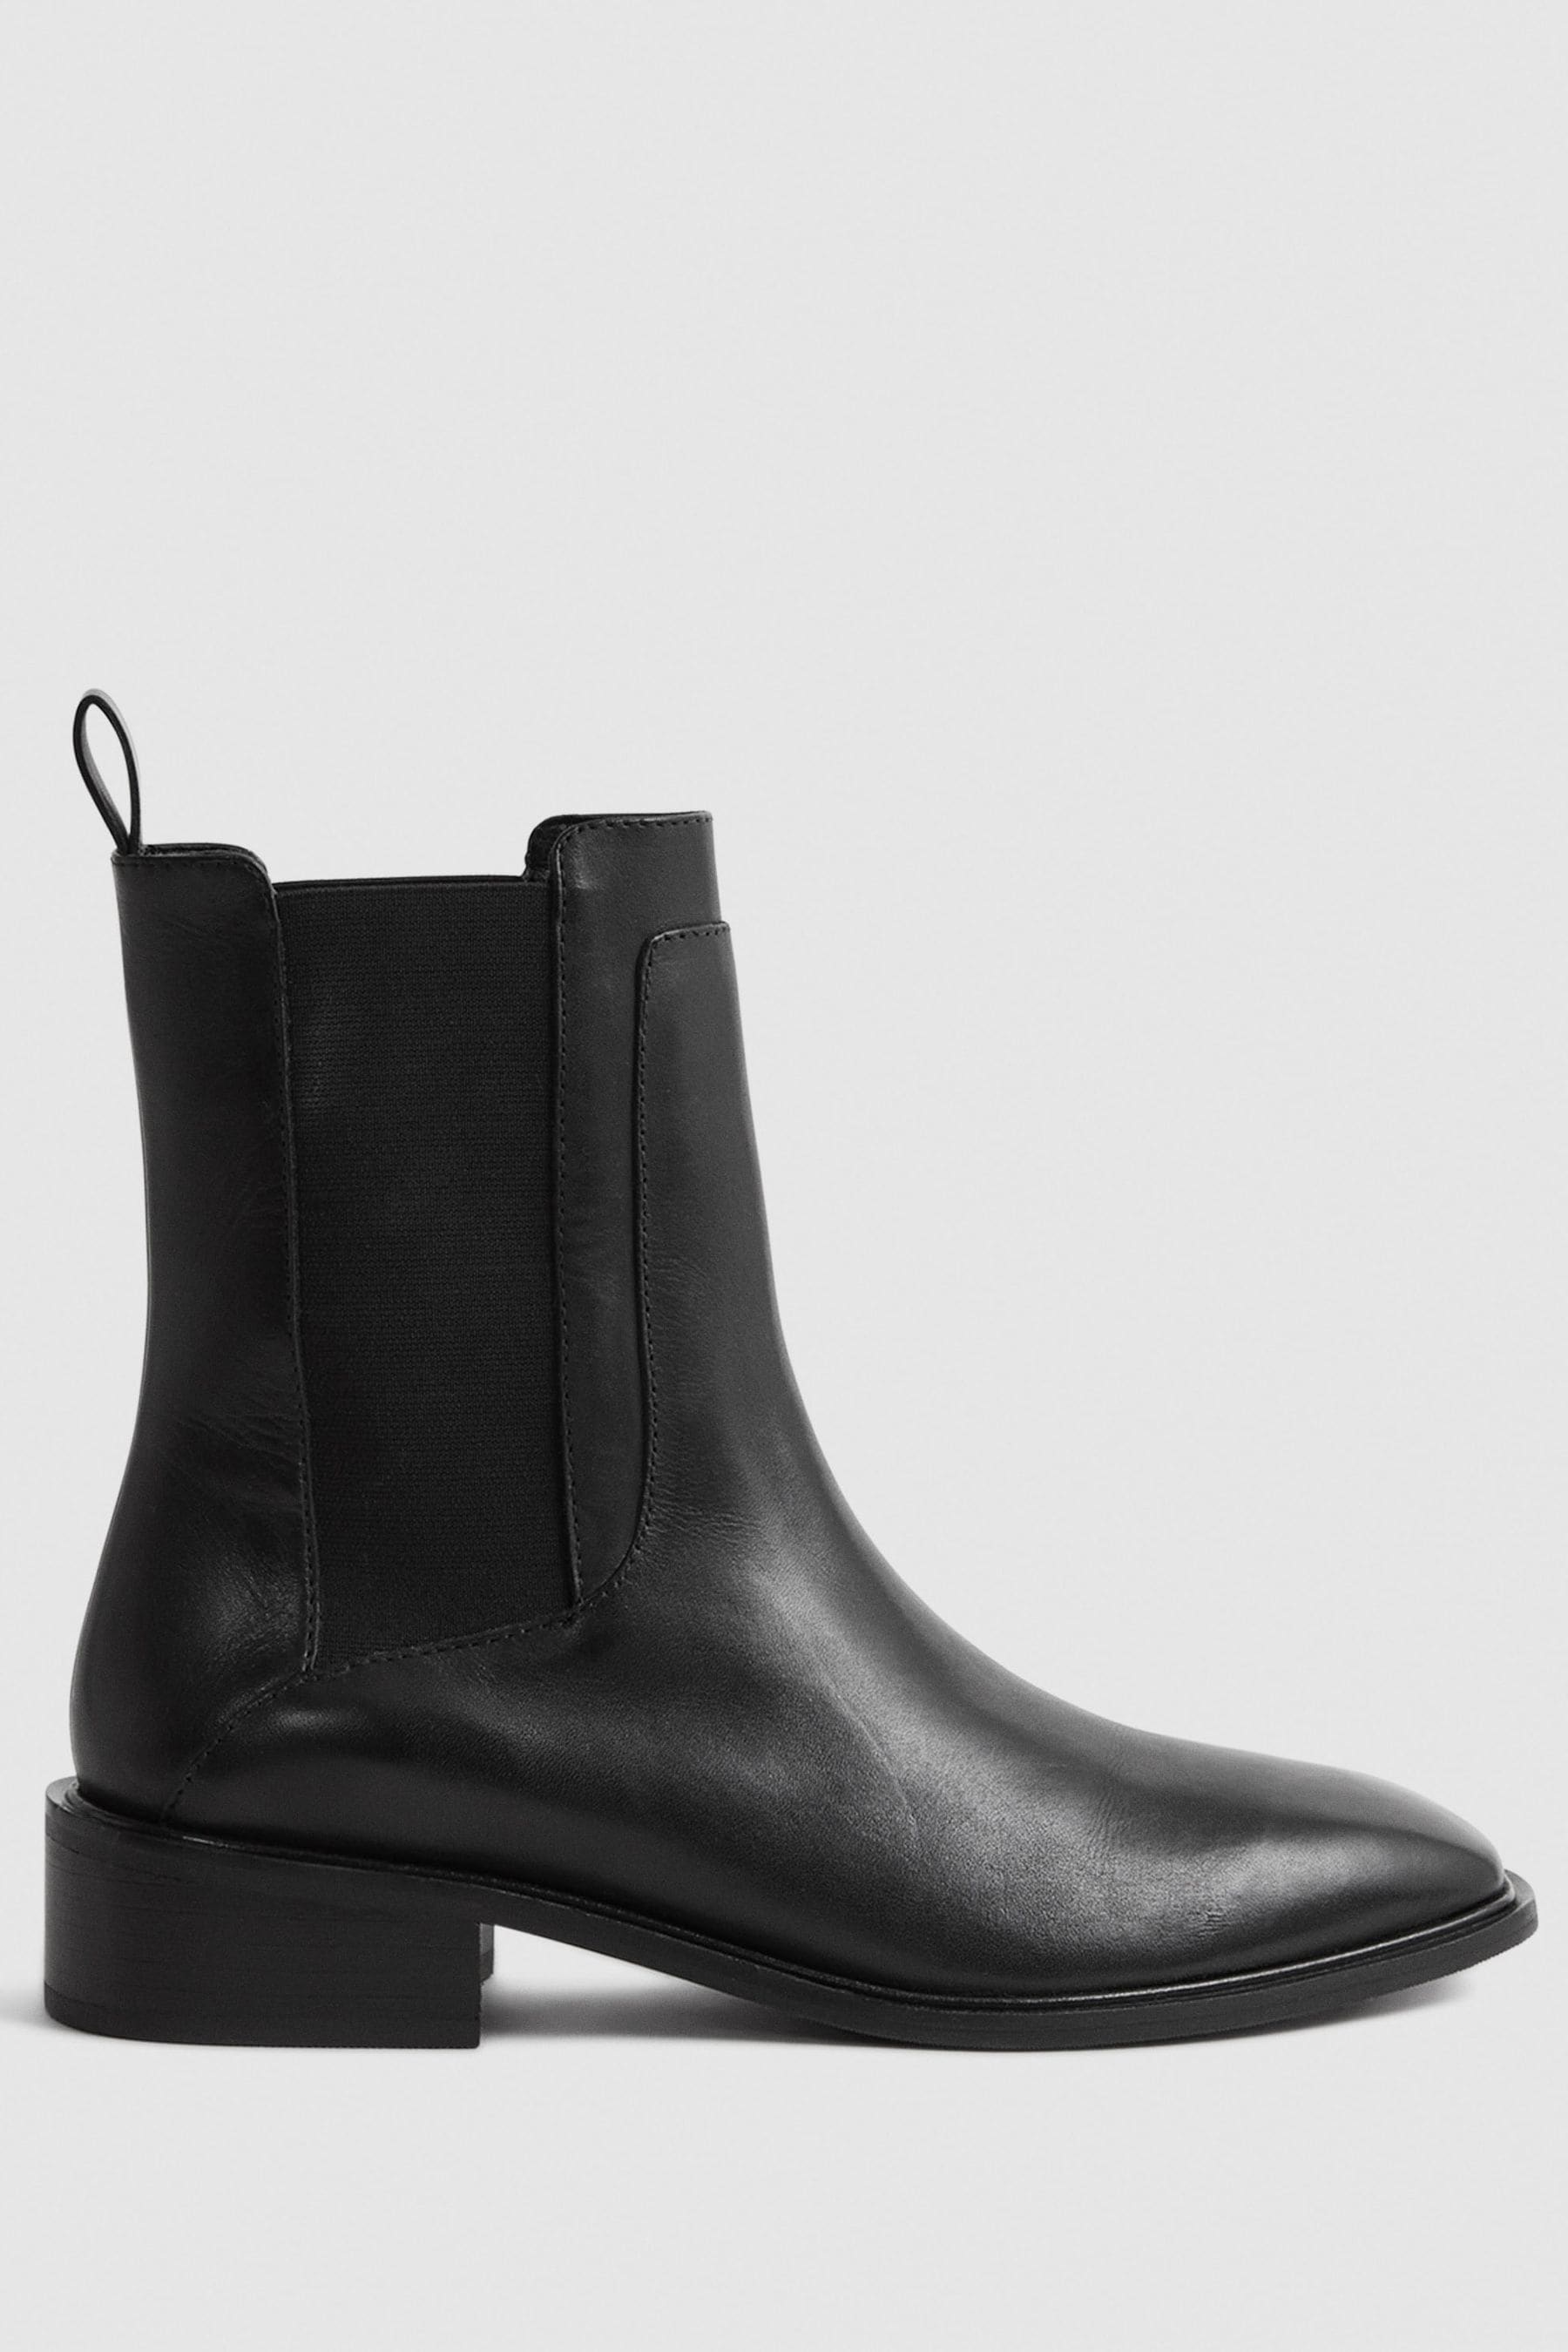 Reiss Willow - Black Leather Chelsea Boots, Uk 4 Eu 37